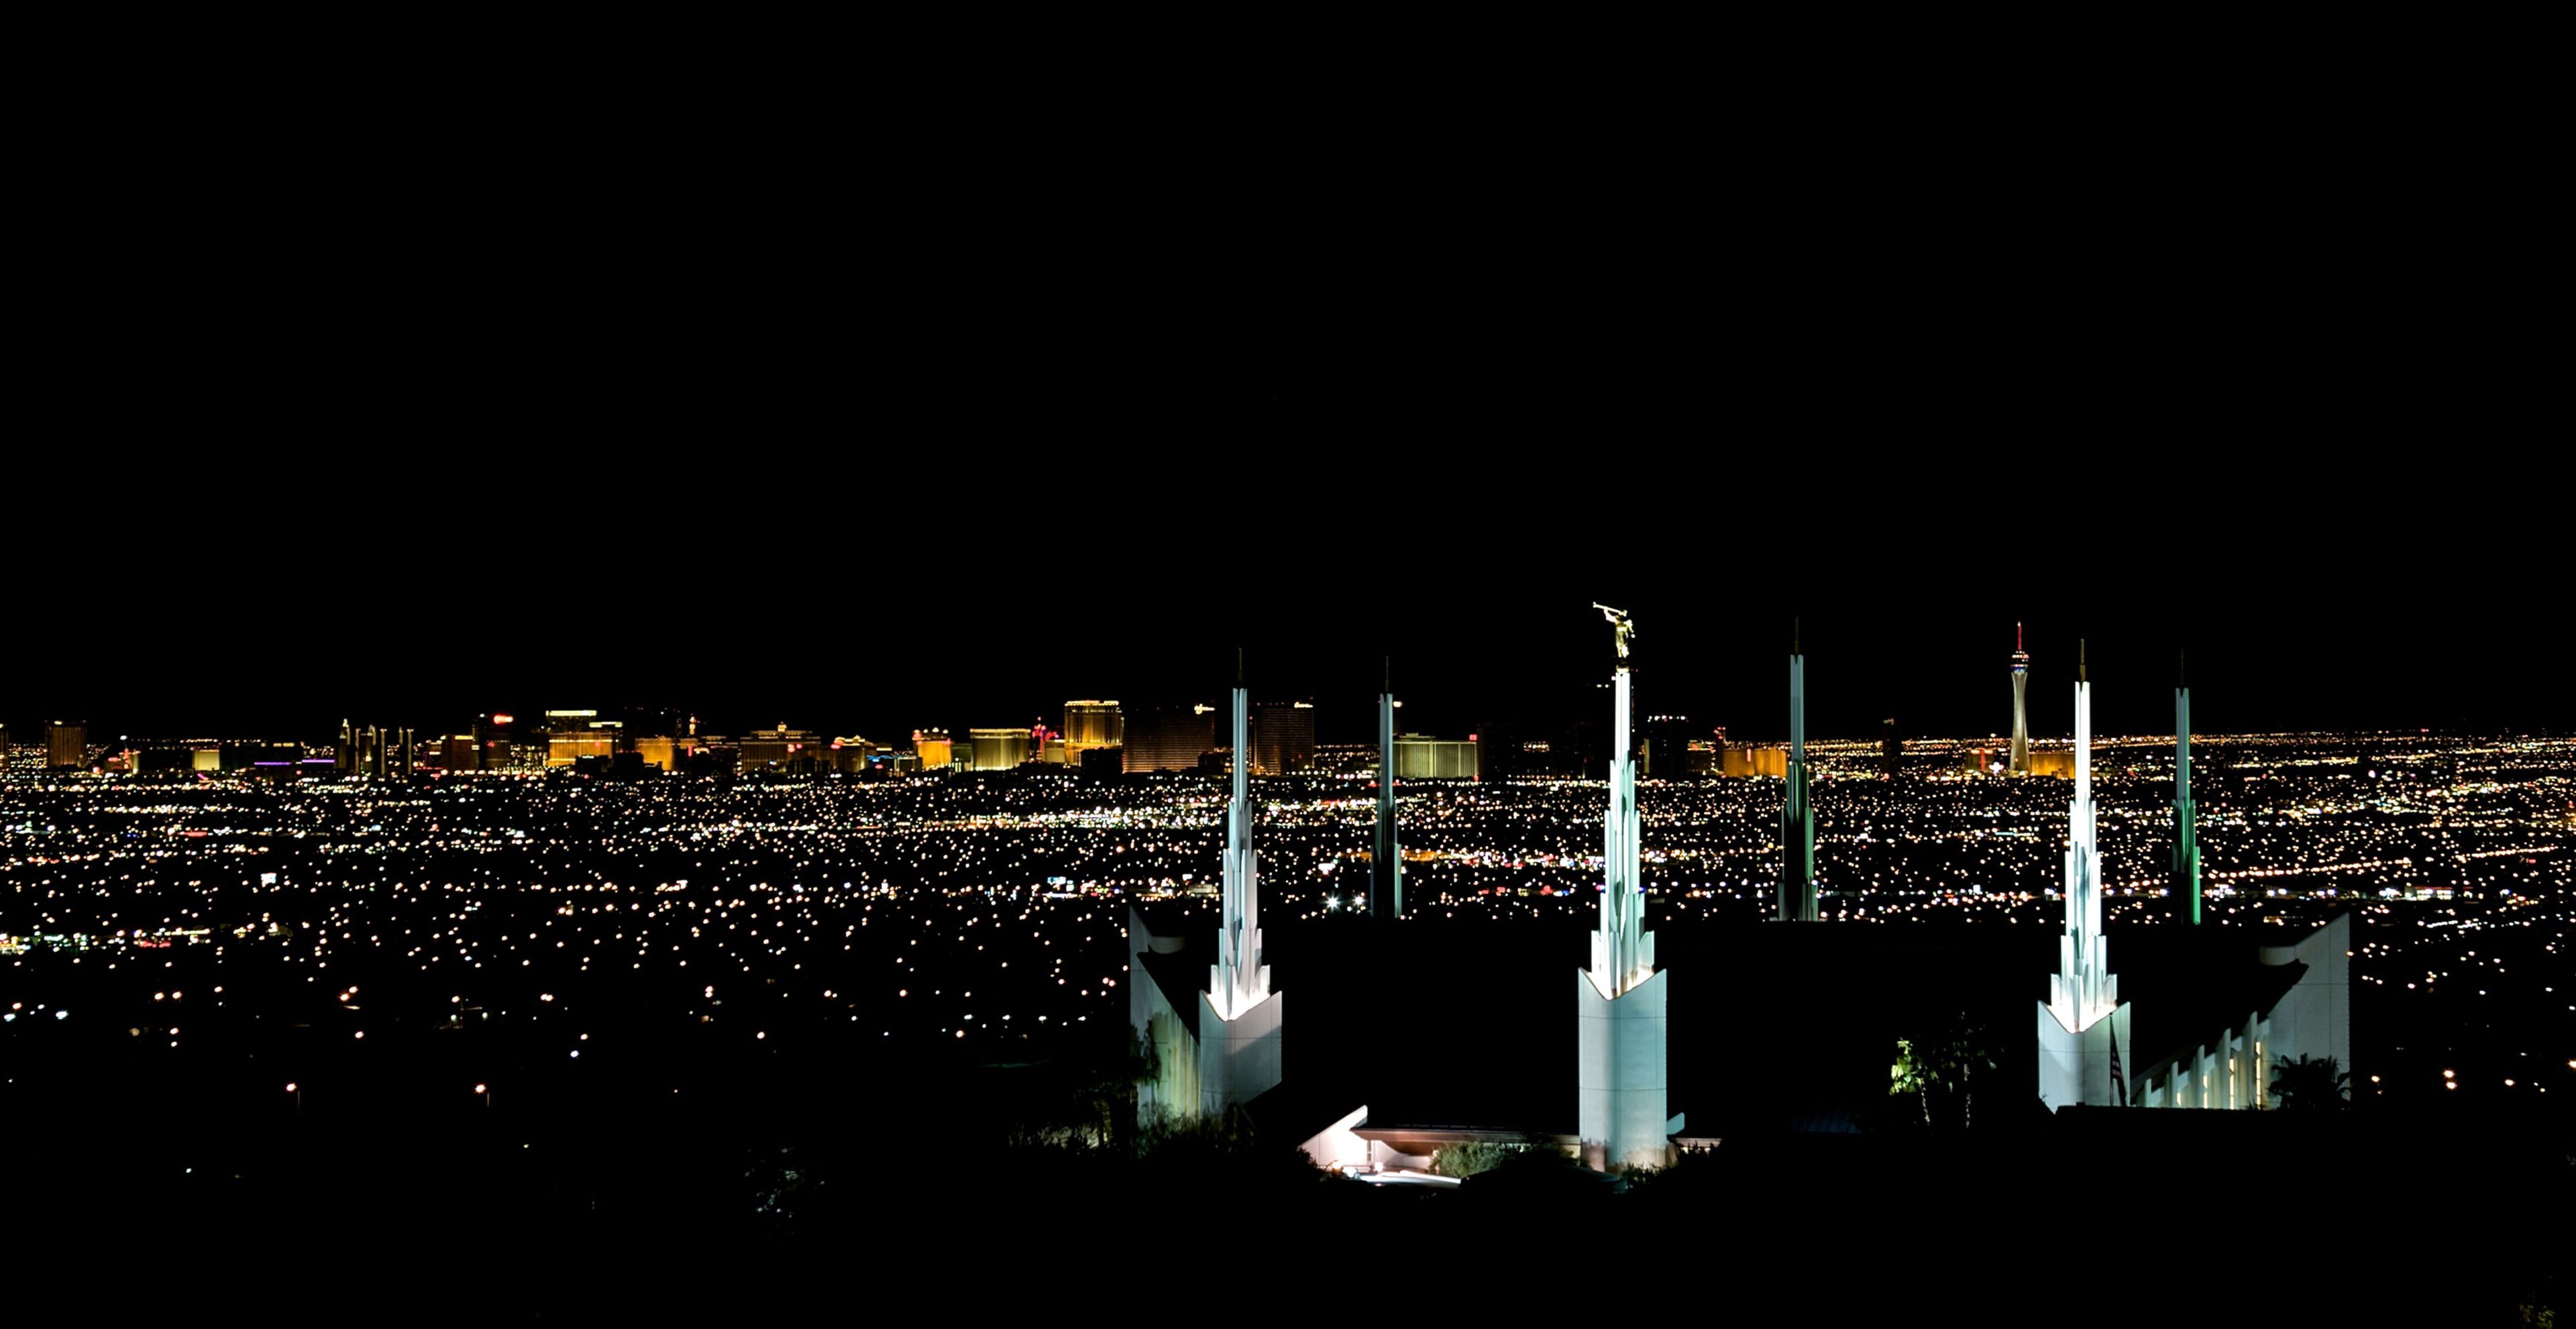 The Las Vegas Nevada Temple in the evening, including the city lights and spires.